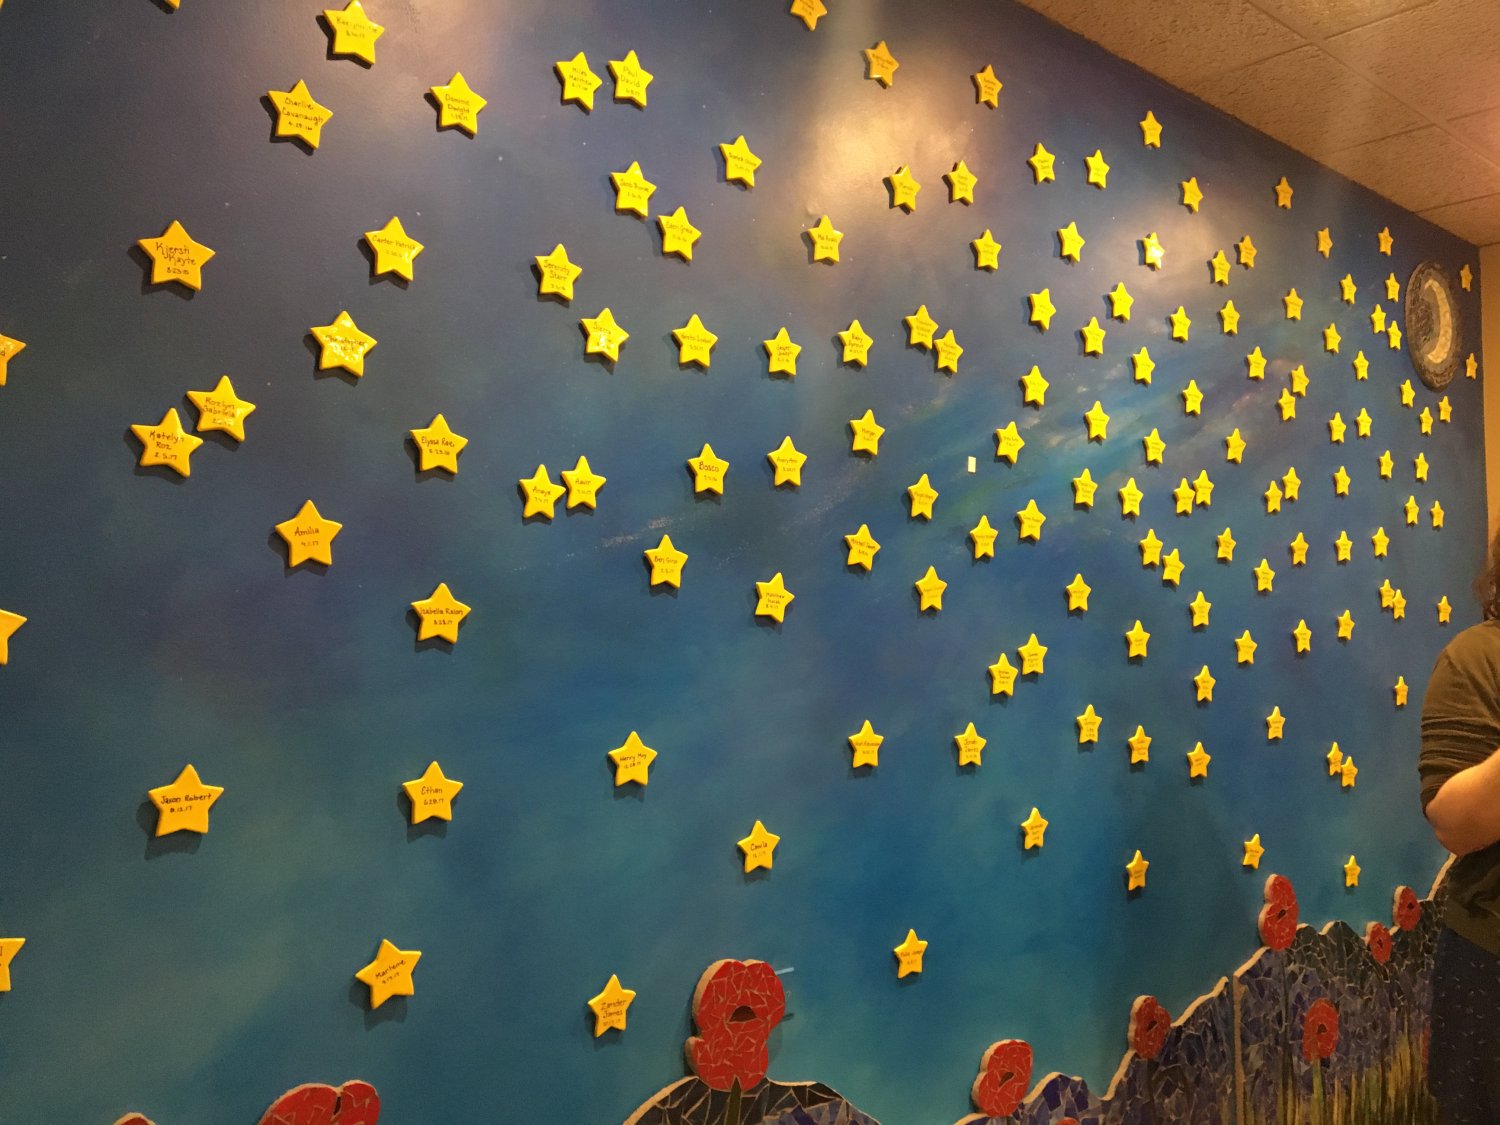 Sky mural with wooden stars attached to it